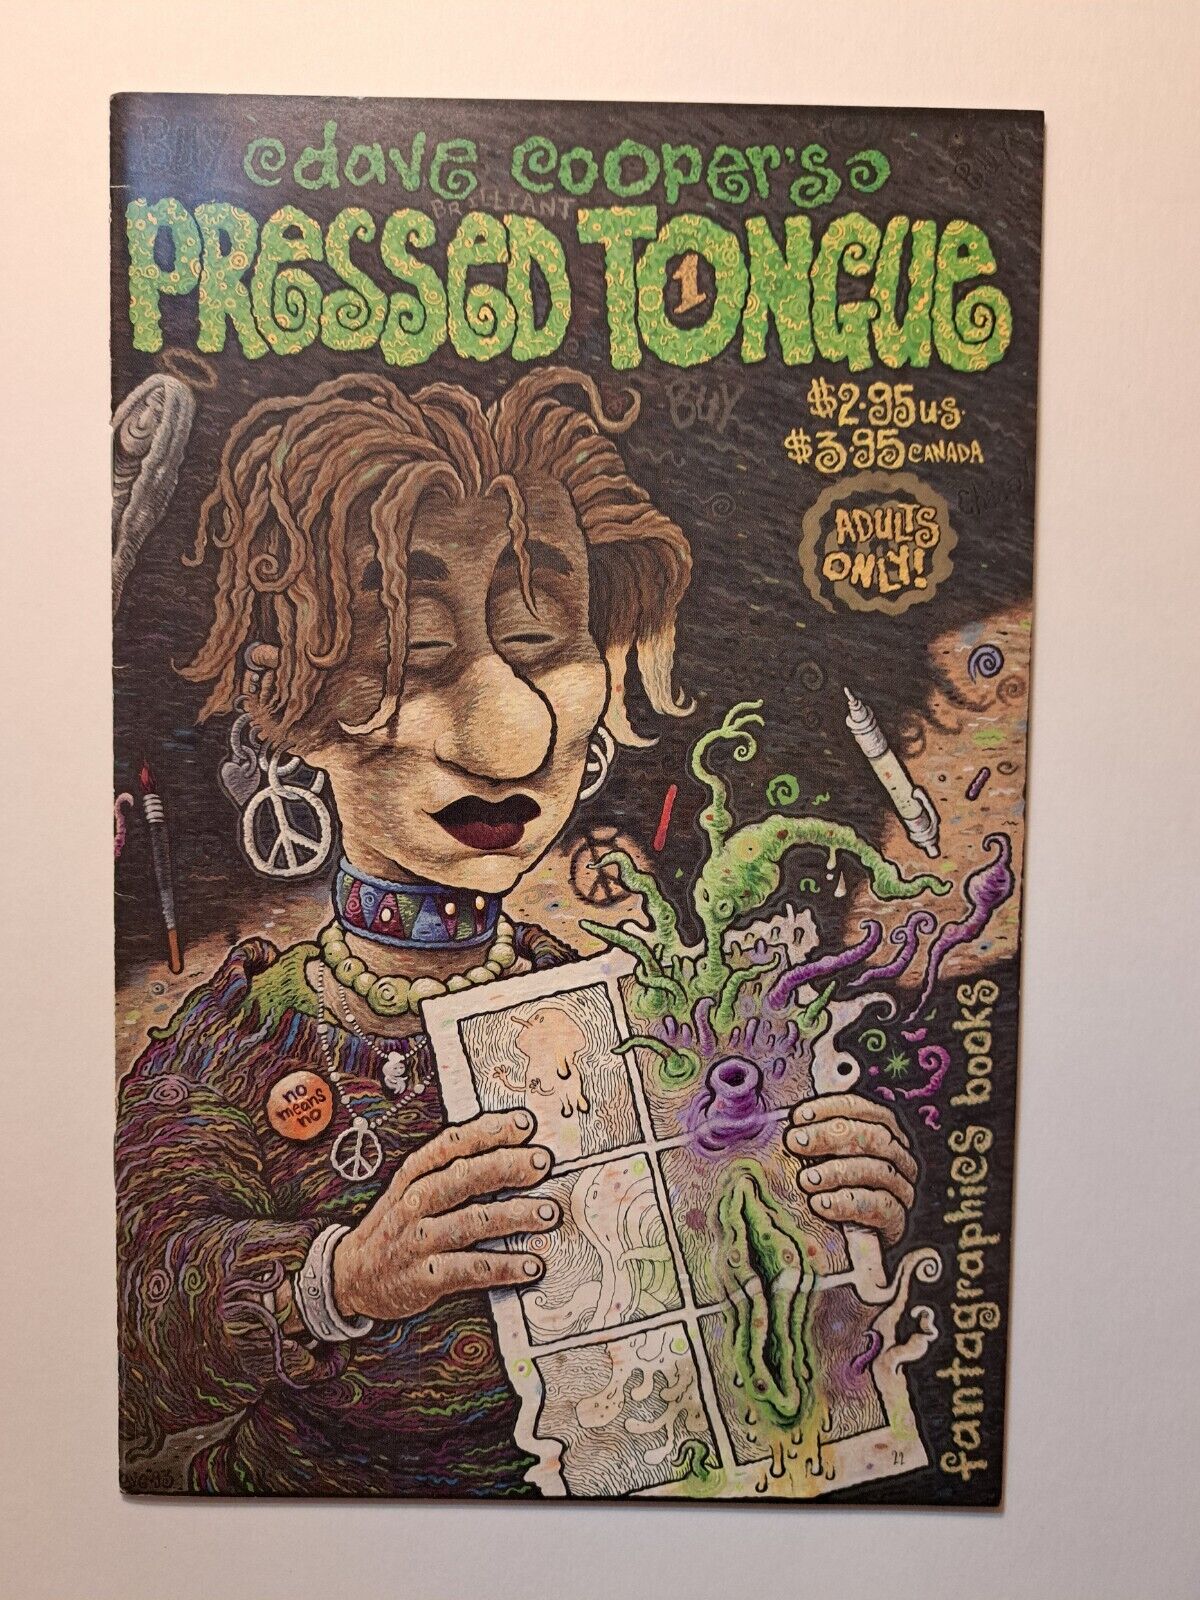 Dave Cooper's Pressed Tongue Comics 1  and 2